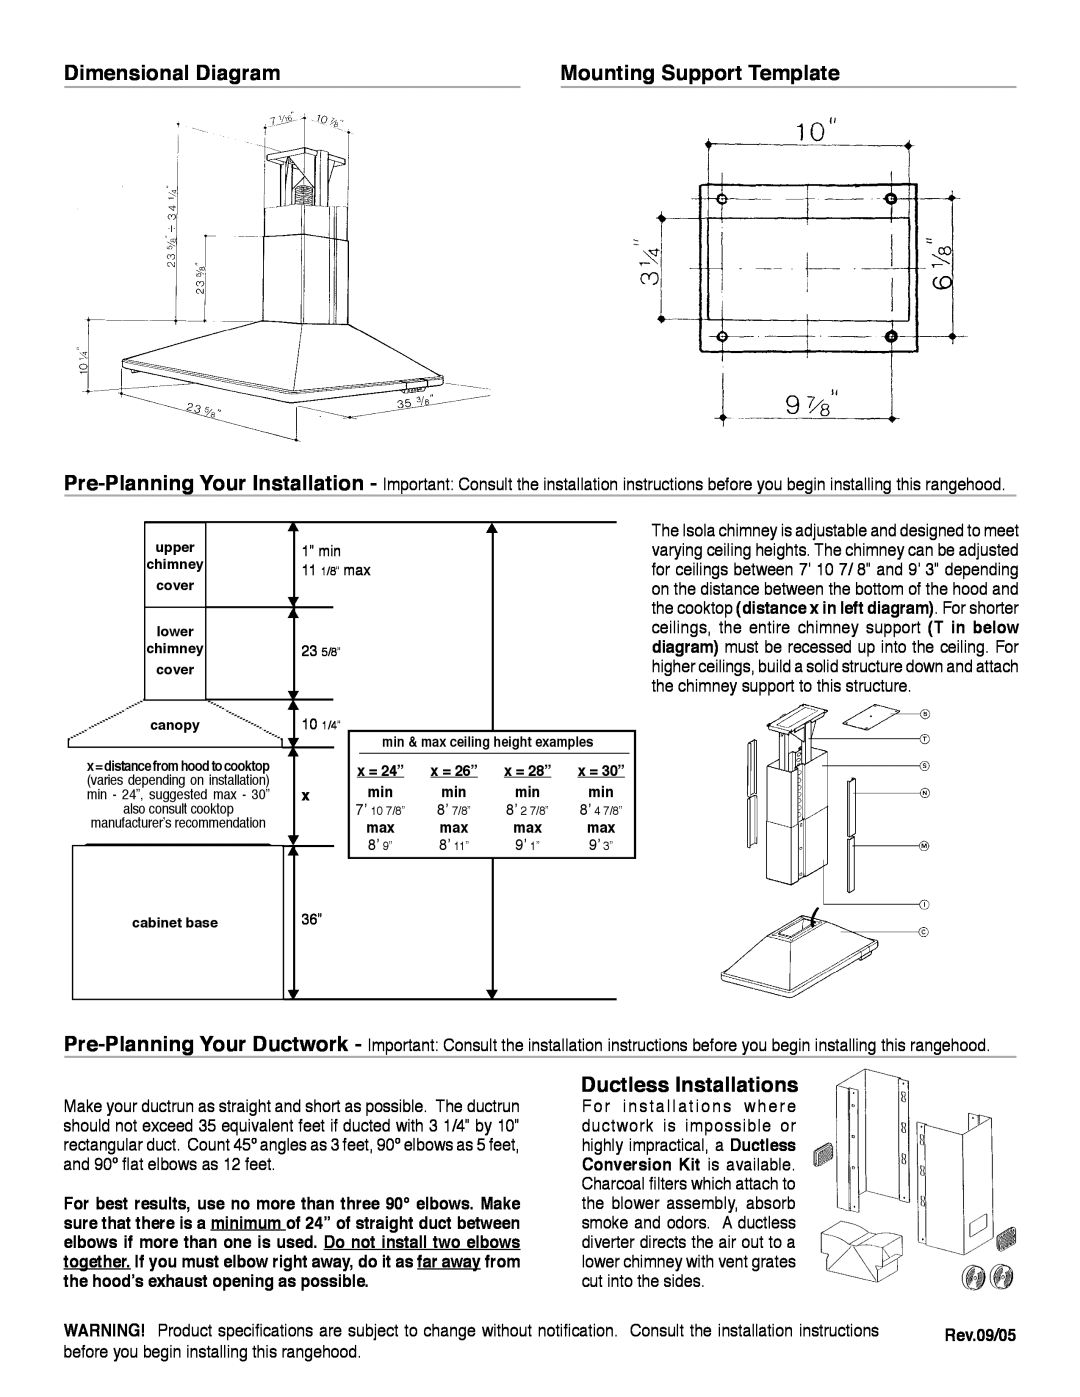 Faber 6044787 manual Dimensional Diagram, Mounting Support Template, Ductless Installations 